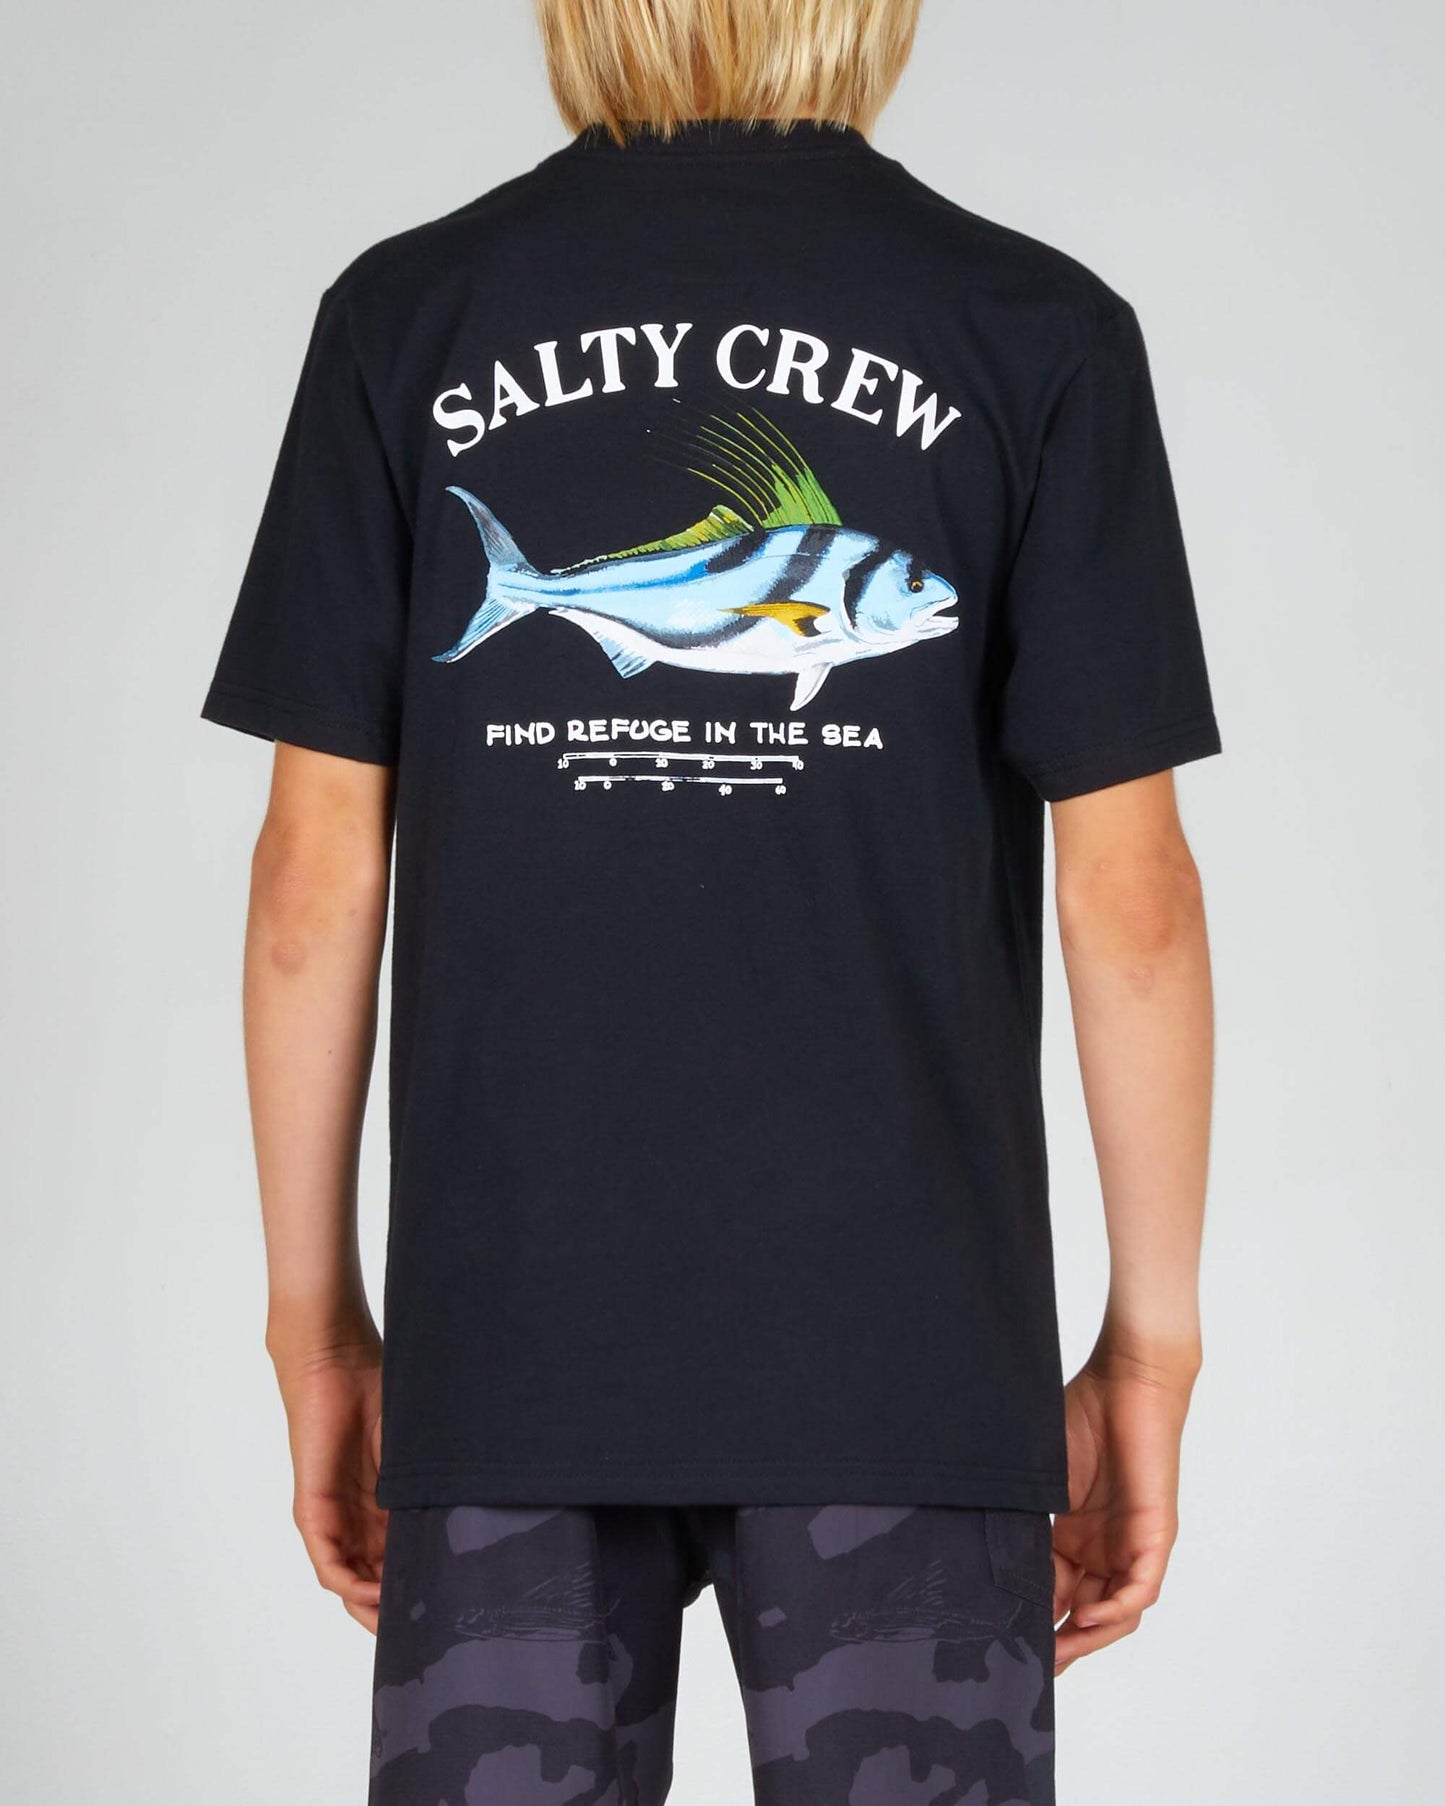 Salty crew T-SHIRTS S/S ROOSTER BOYS S/S TEE - Black in Black